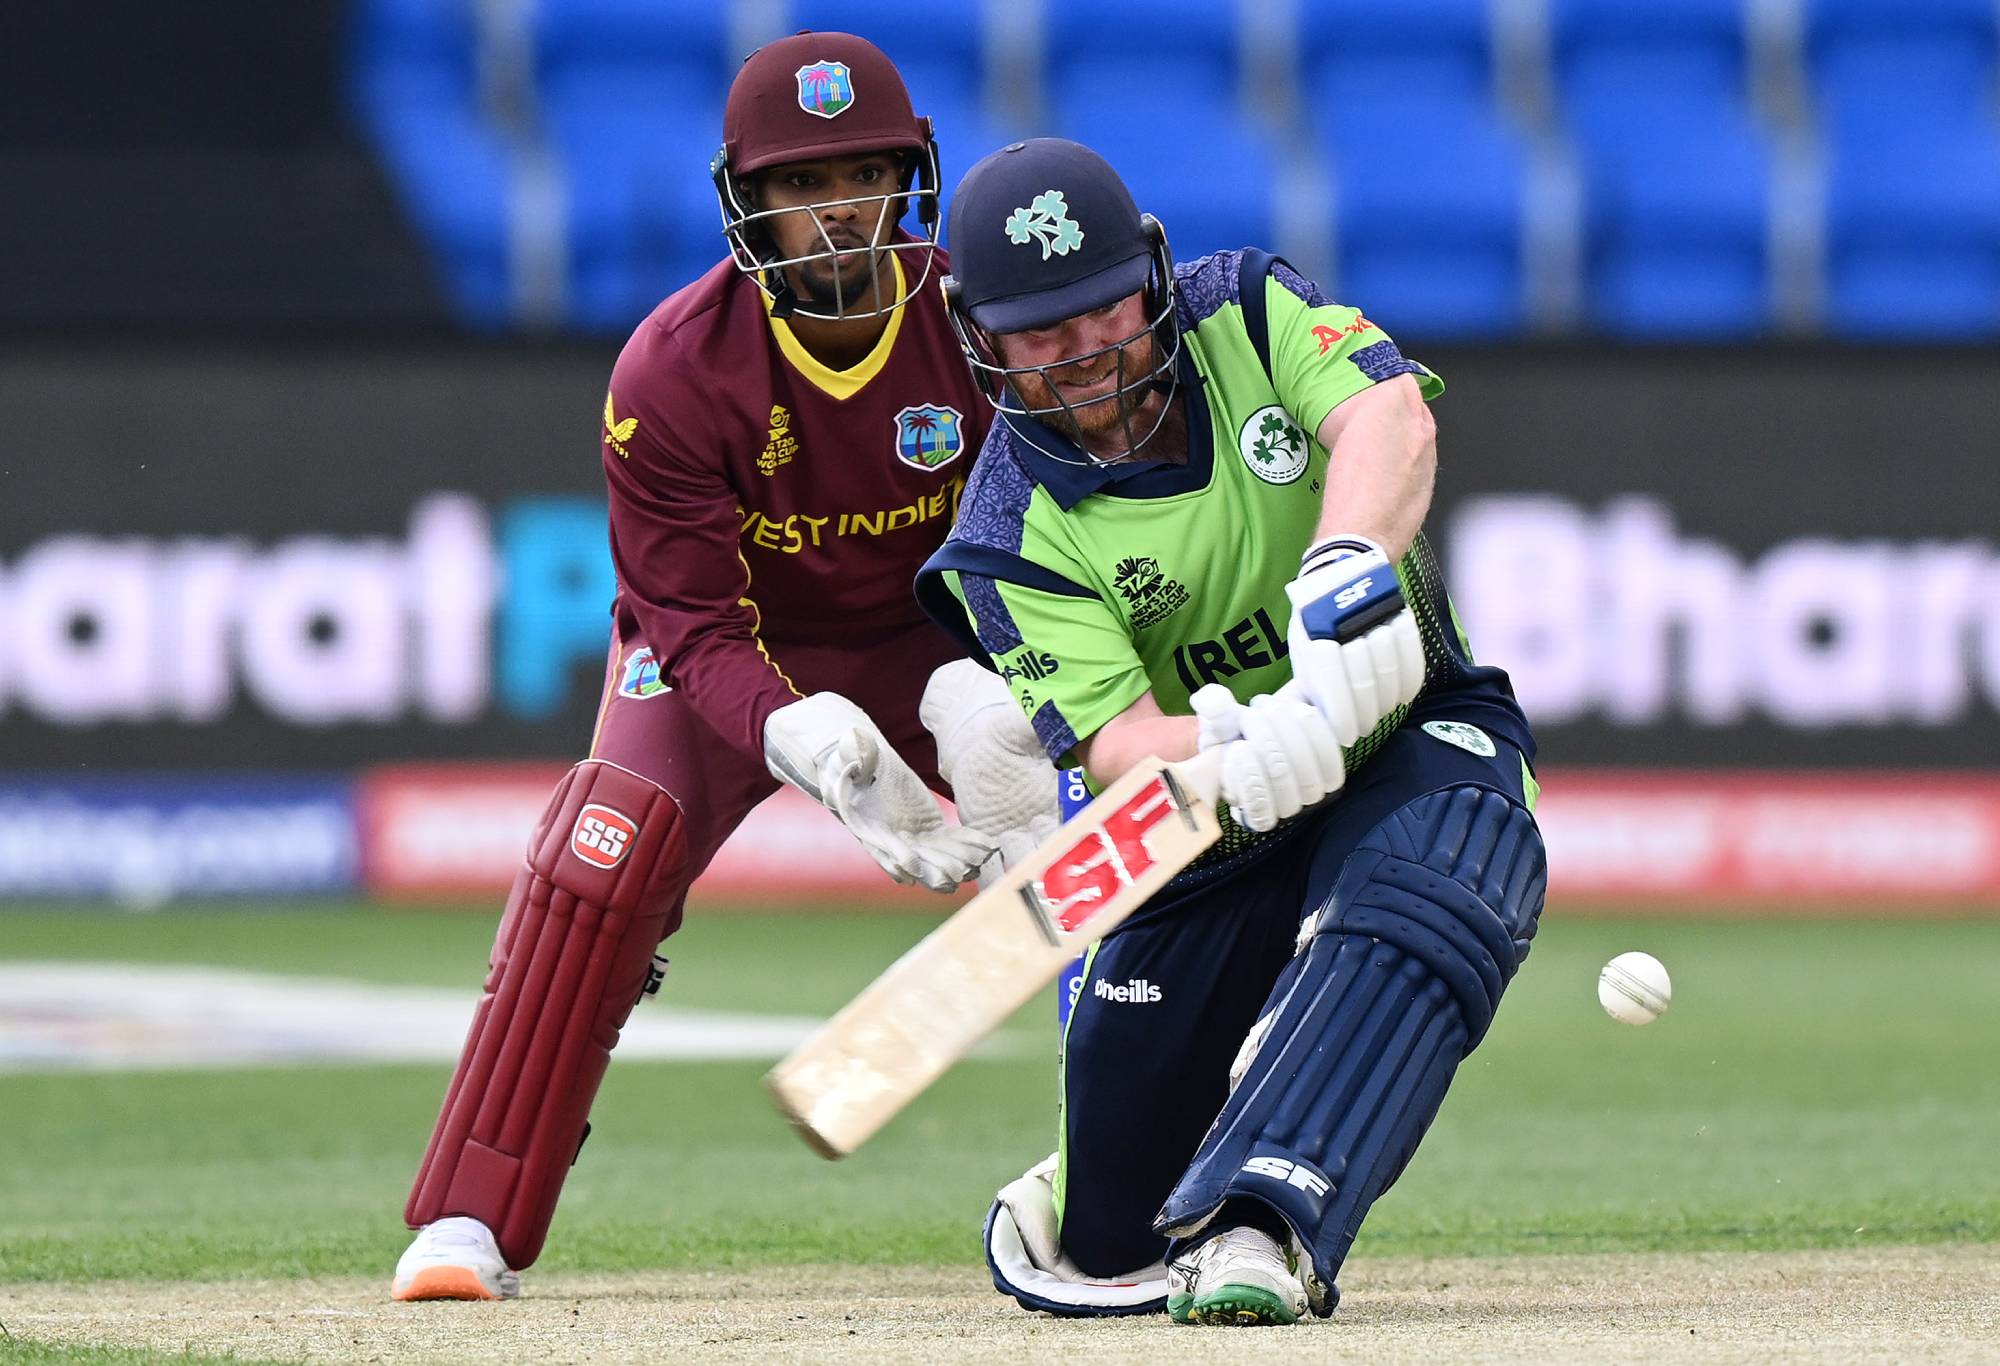 HOBART, AUSTRALIA - OCTOBER 21: Paul Stirling of Ireland bats during the ICC Men's T20 World Cup match between West Indies and Ireland at Bellerive Oval on October 21, 2022 in Hobart, Australia. (Photo by Steve Bell - ICC/ICC via Getty Images)